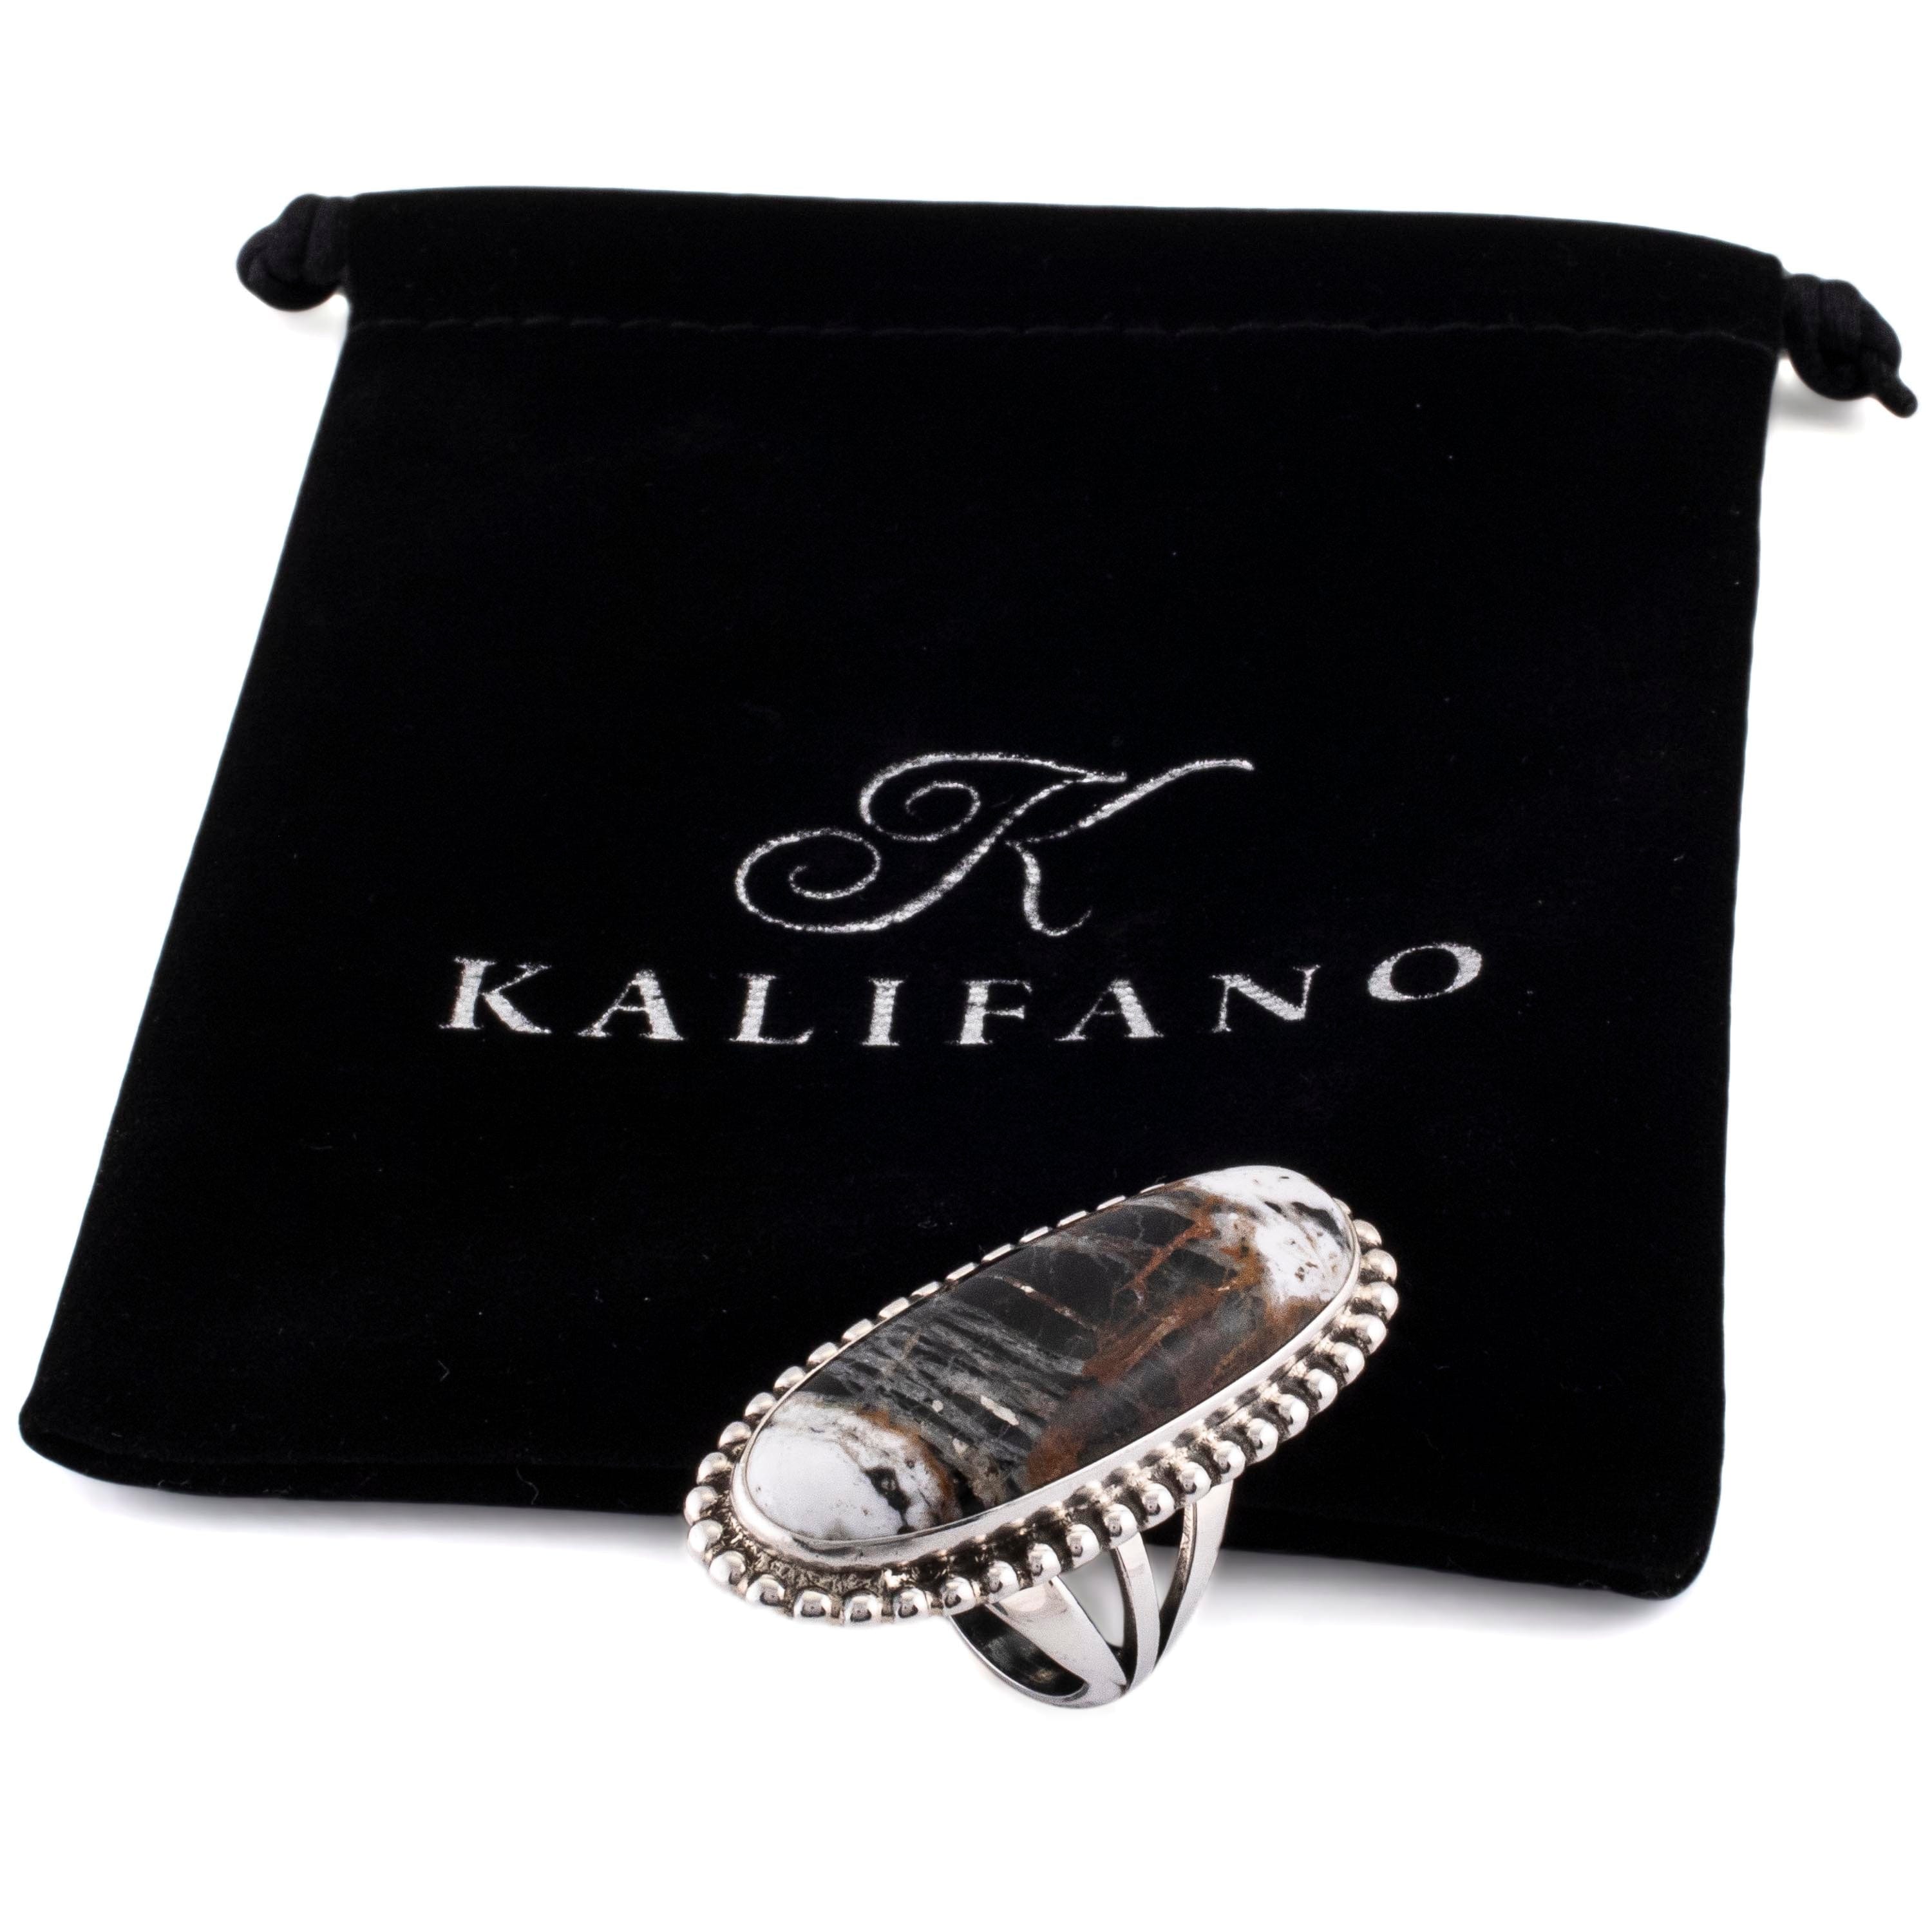 Kalifano Native American Jewelry 8 Eddie Secatero Navajo White Buffalo Turquoise USA Native American Made 925 Sterling Silver Ring NAR900.025.8